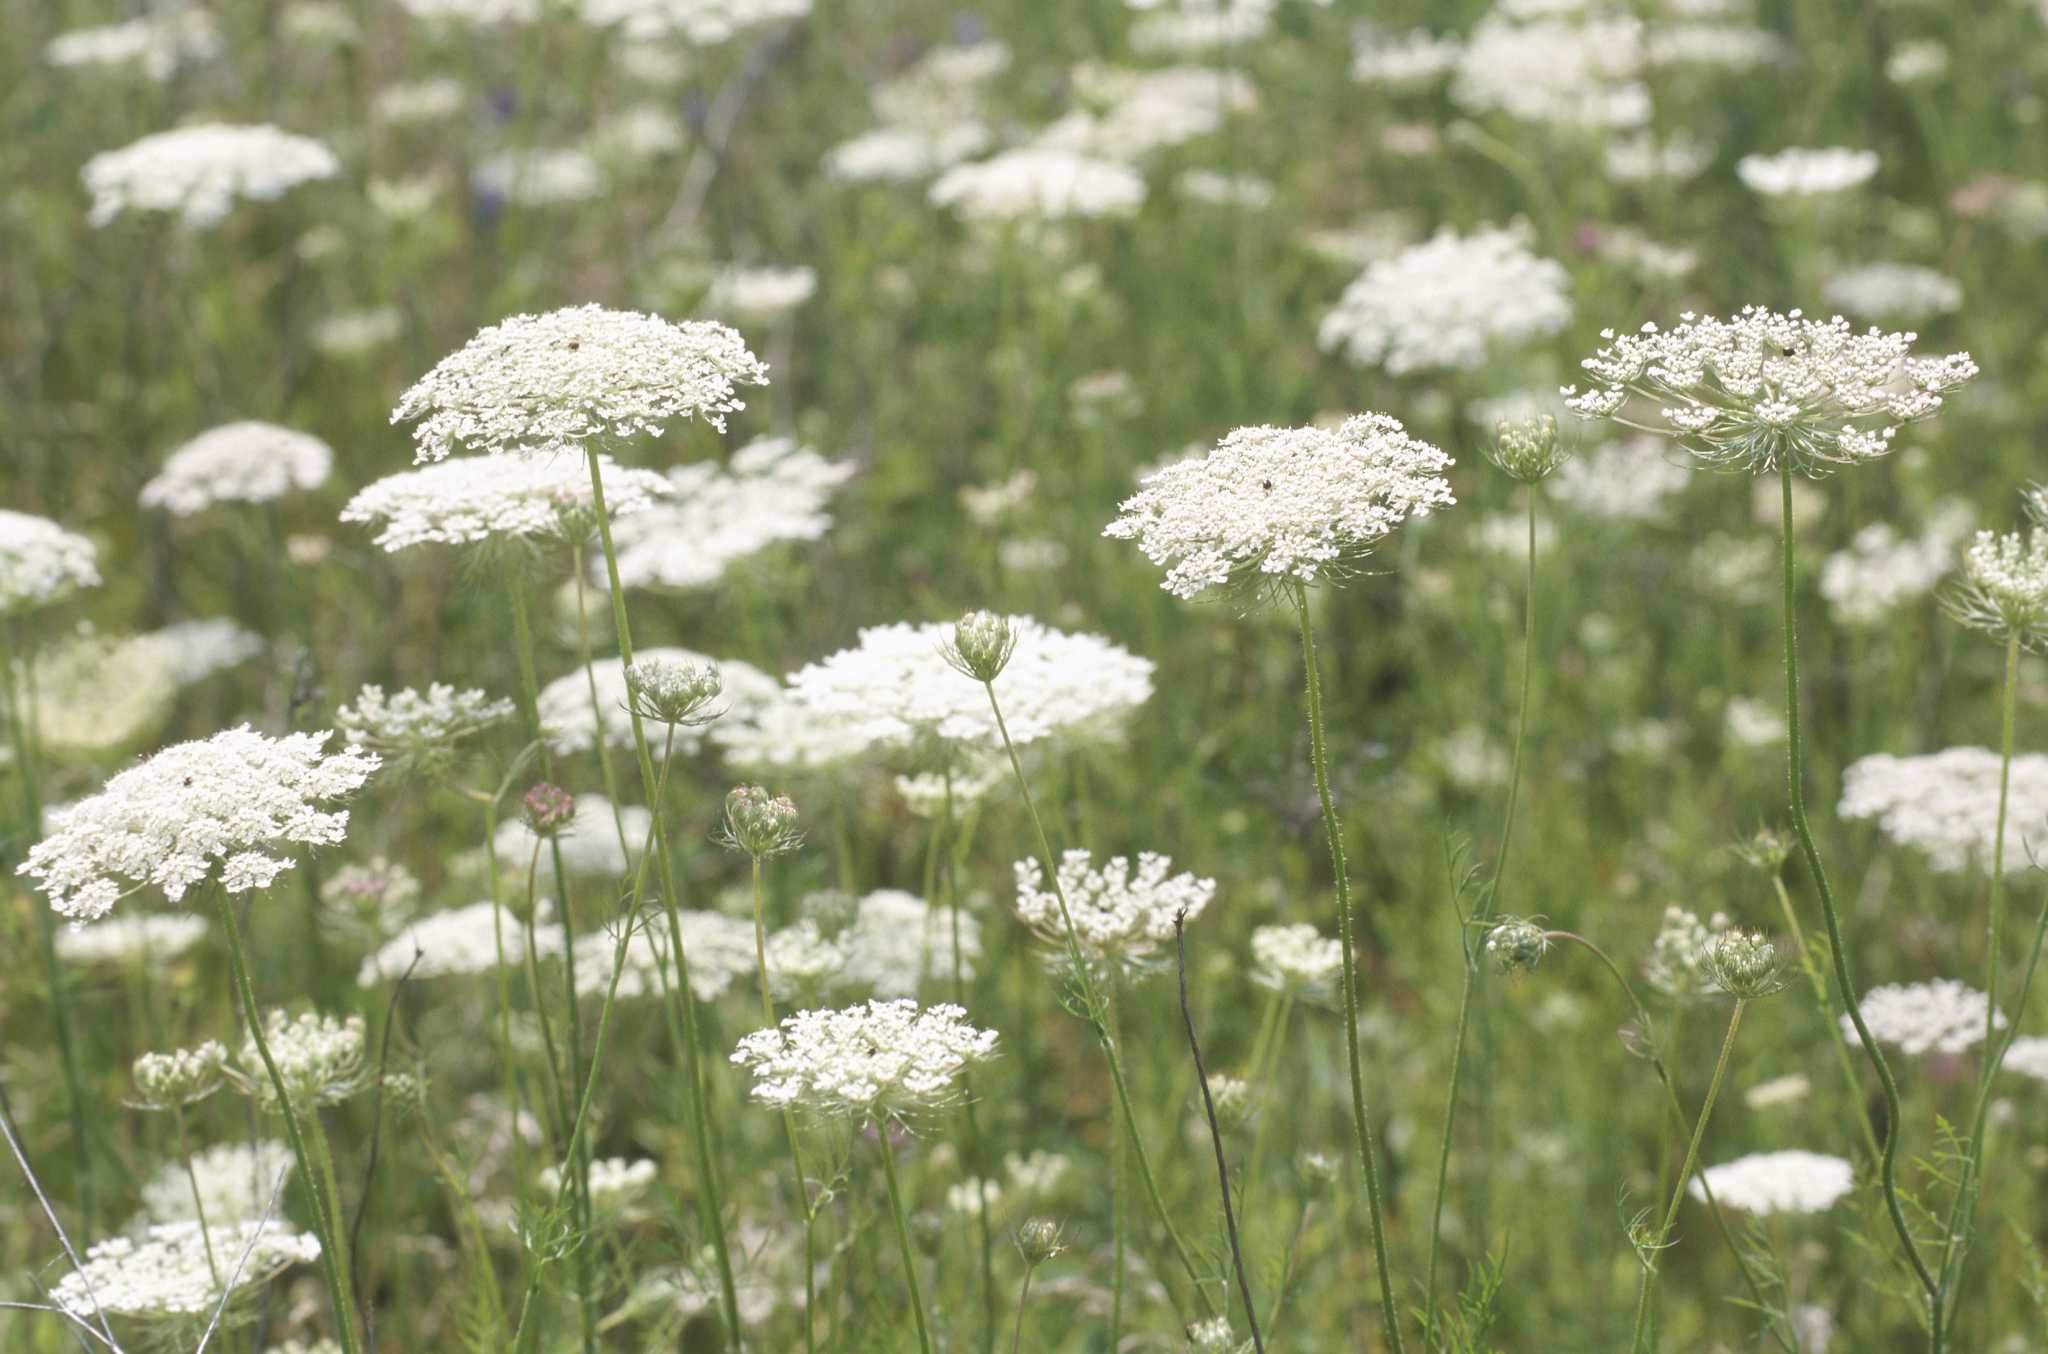 Queen Anne's lace is difficult to eradicate